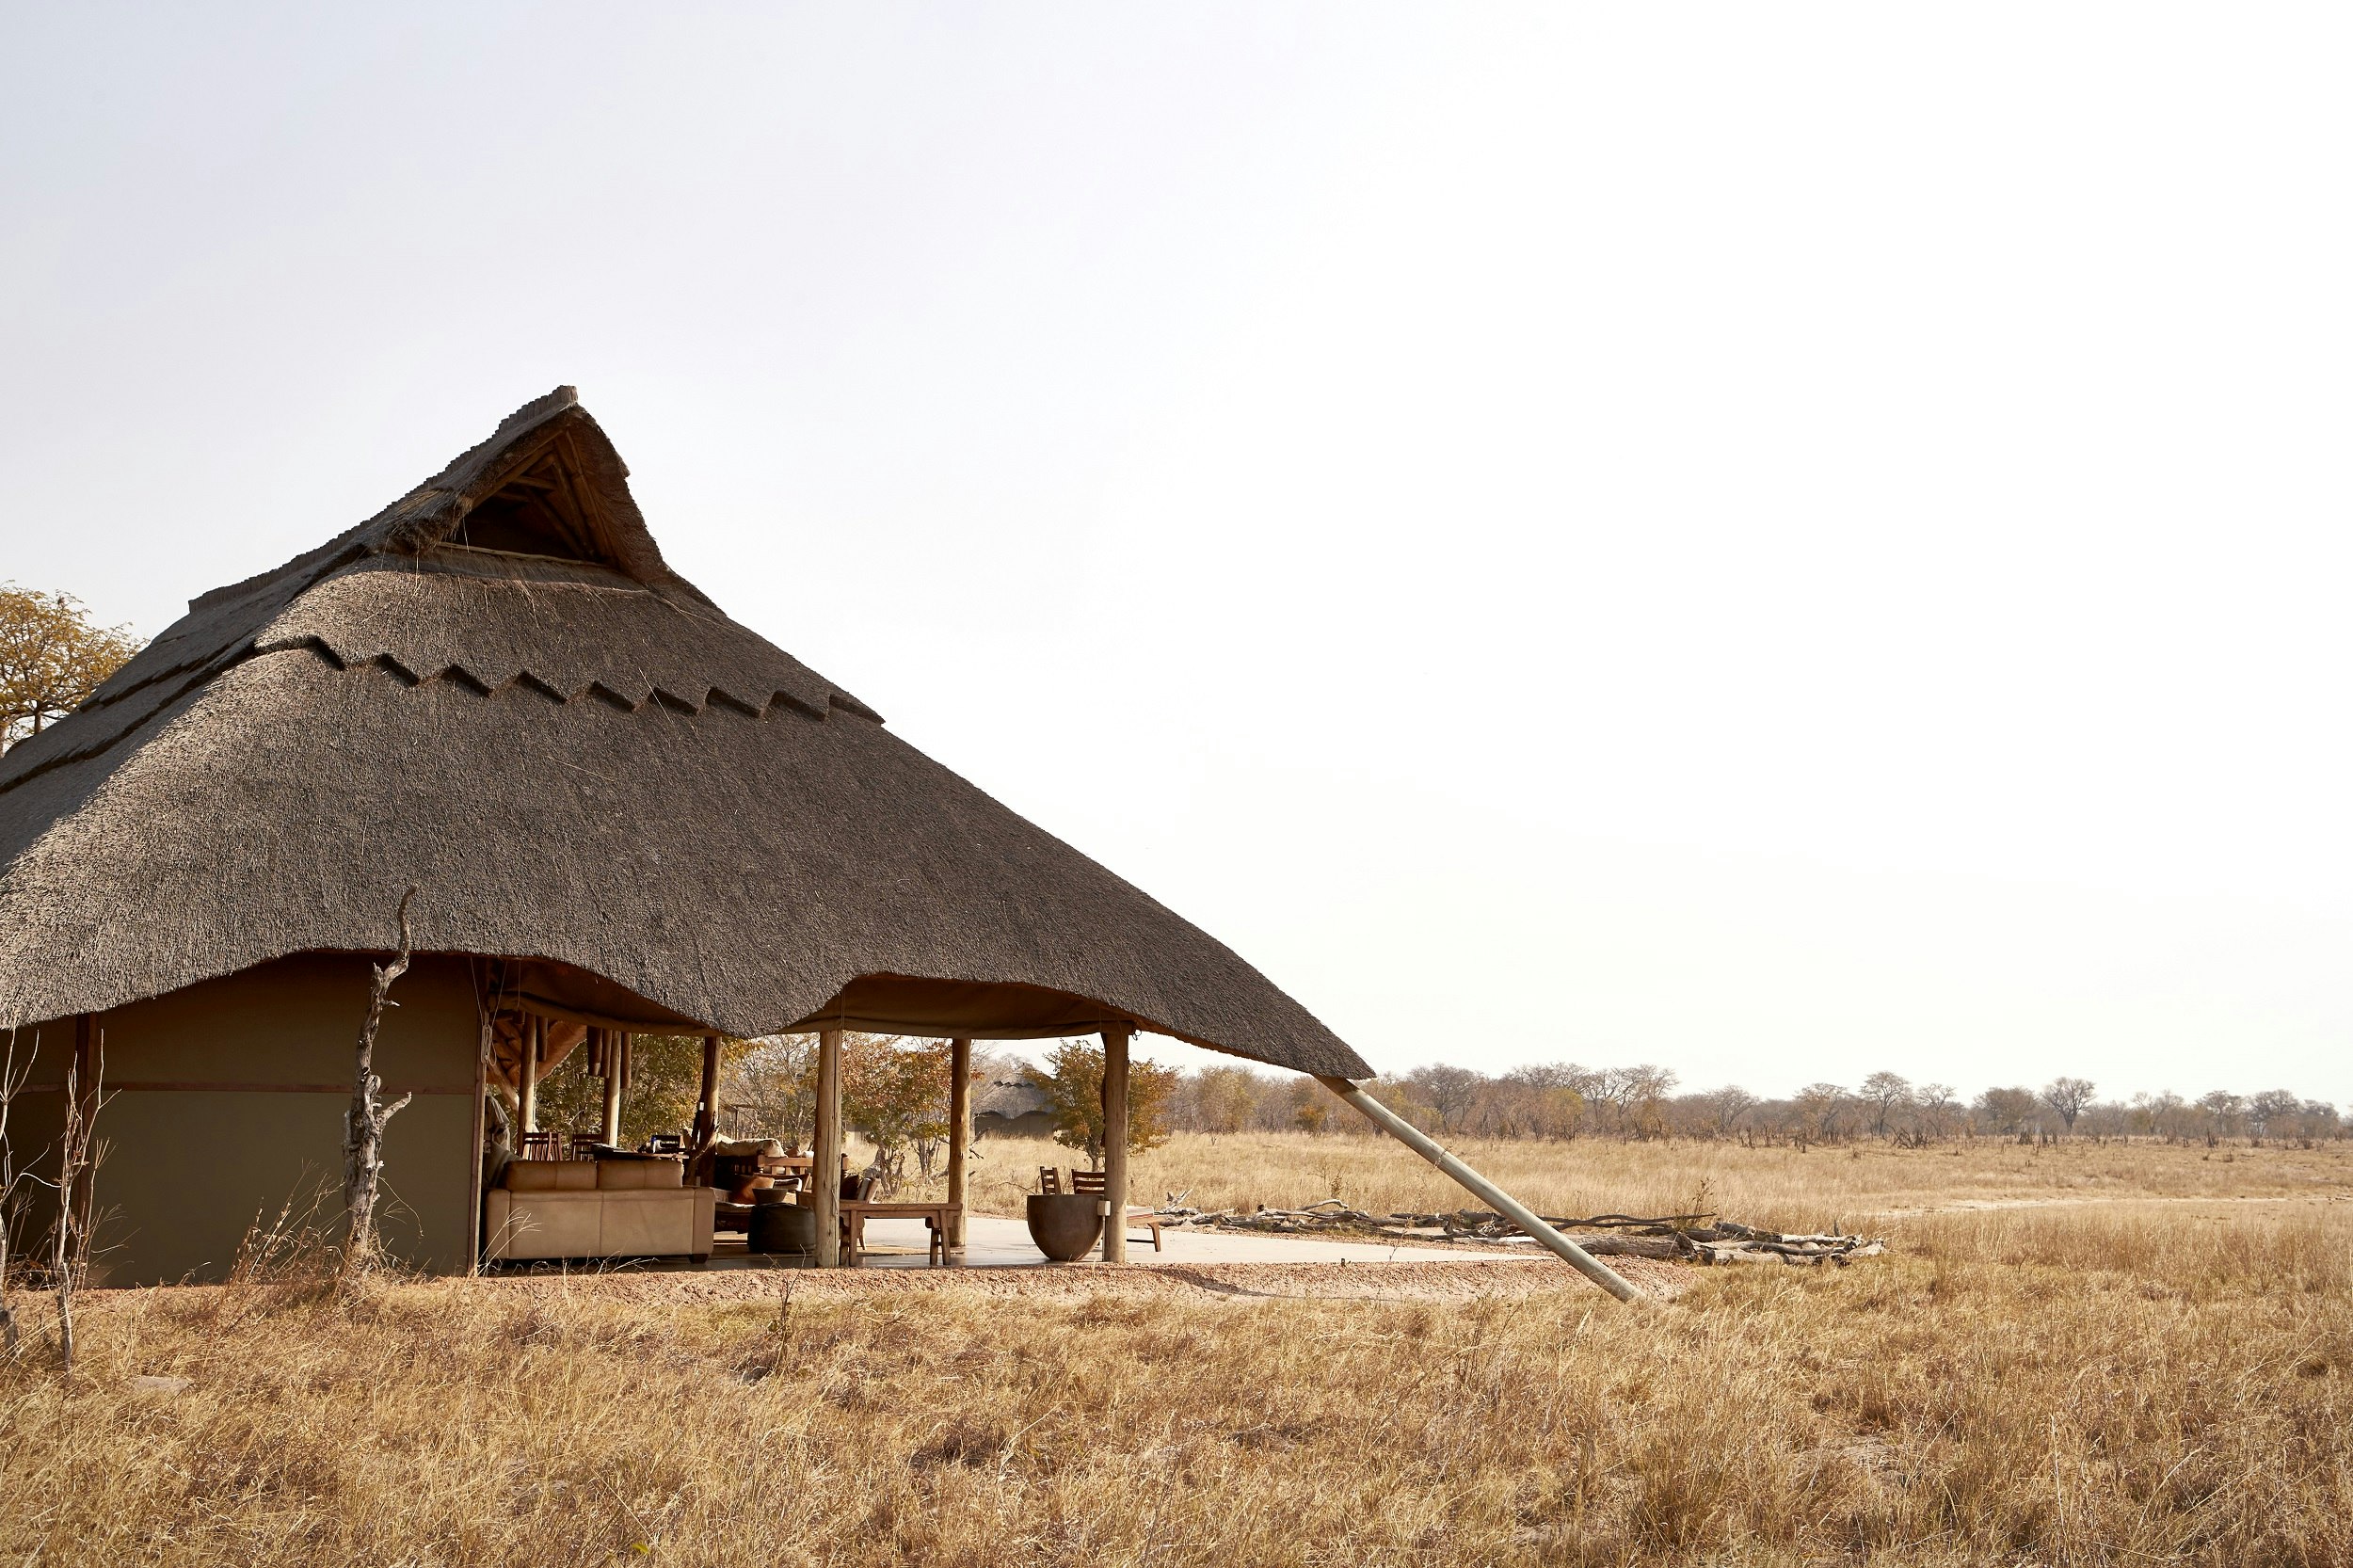 A beautiful thatch-roofed safari accommodation lodge sitting in a dry grass savannah; one half of the interior is open to the environment, with just the roof covering it (no walls).